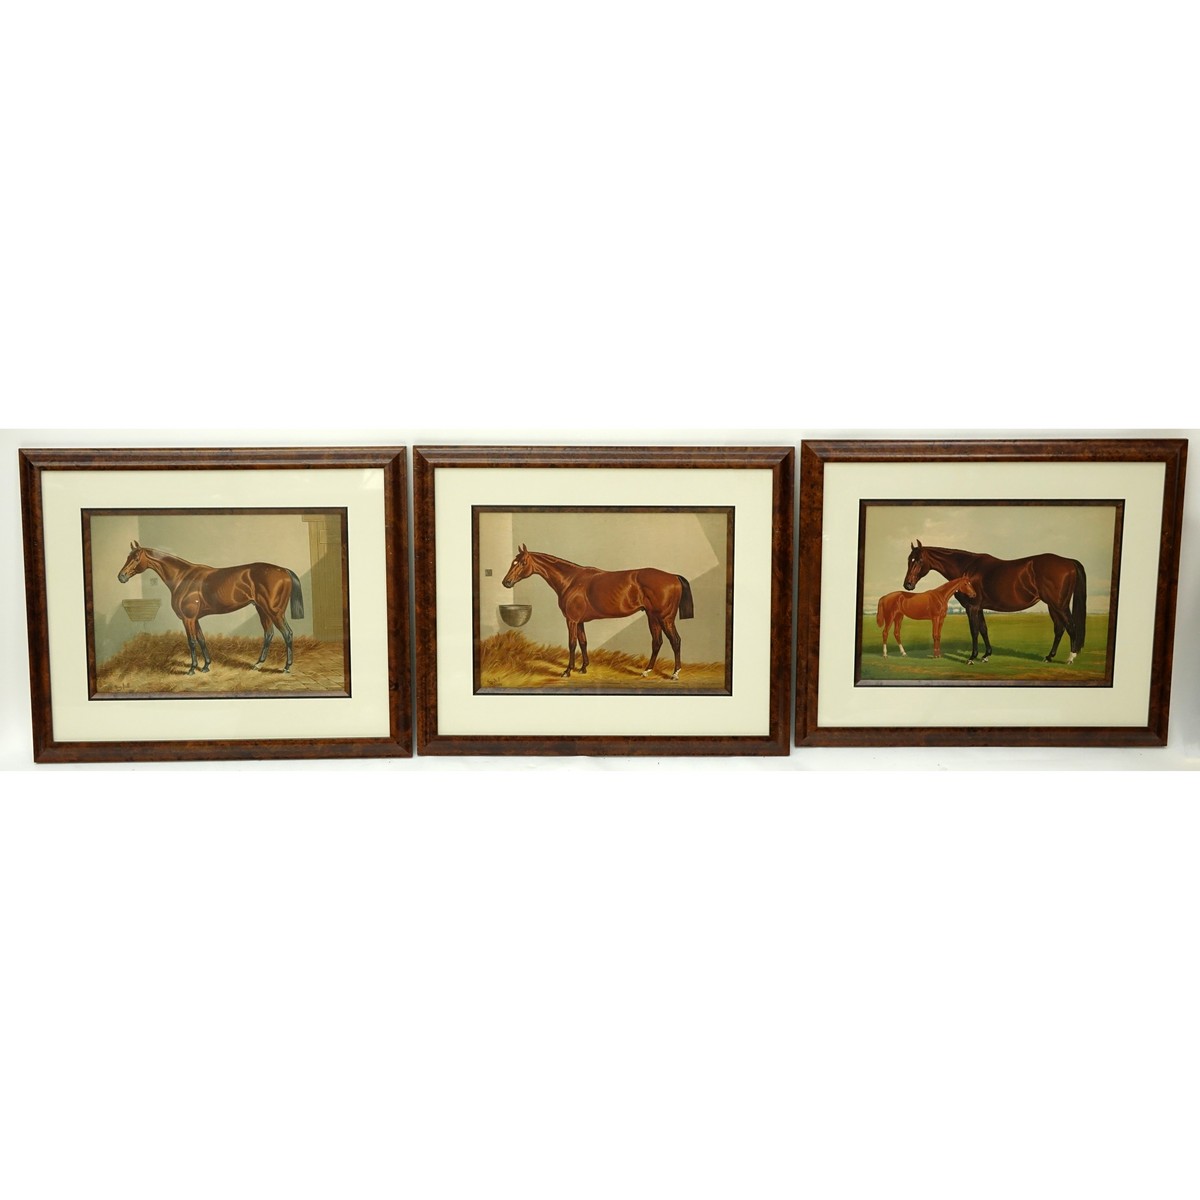 After: Henry Stull  (1851 - 1913) Three (3) framed race horse prints with vintage lineage paperwork pertaining to each horse. Good condition.